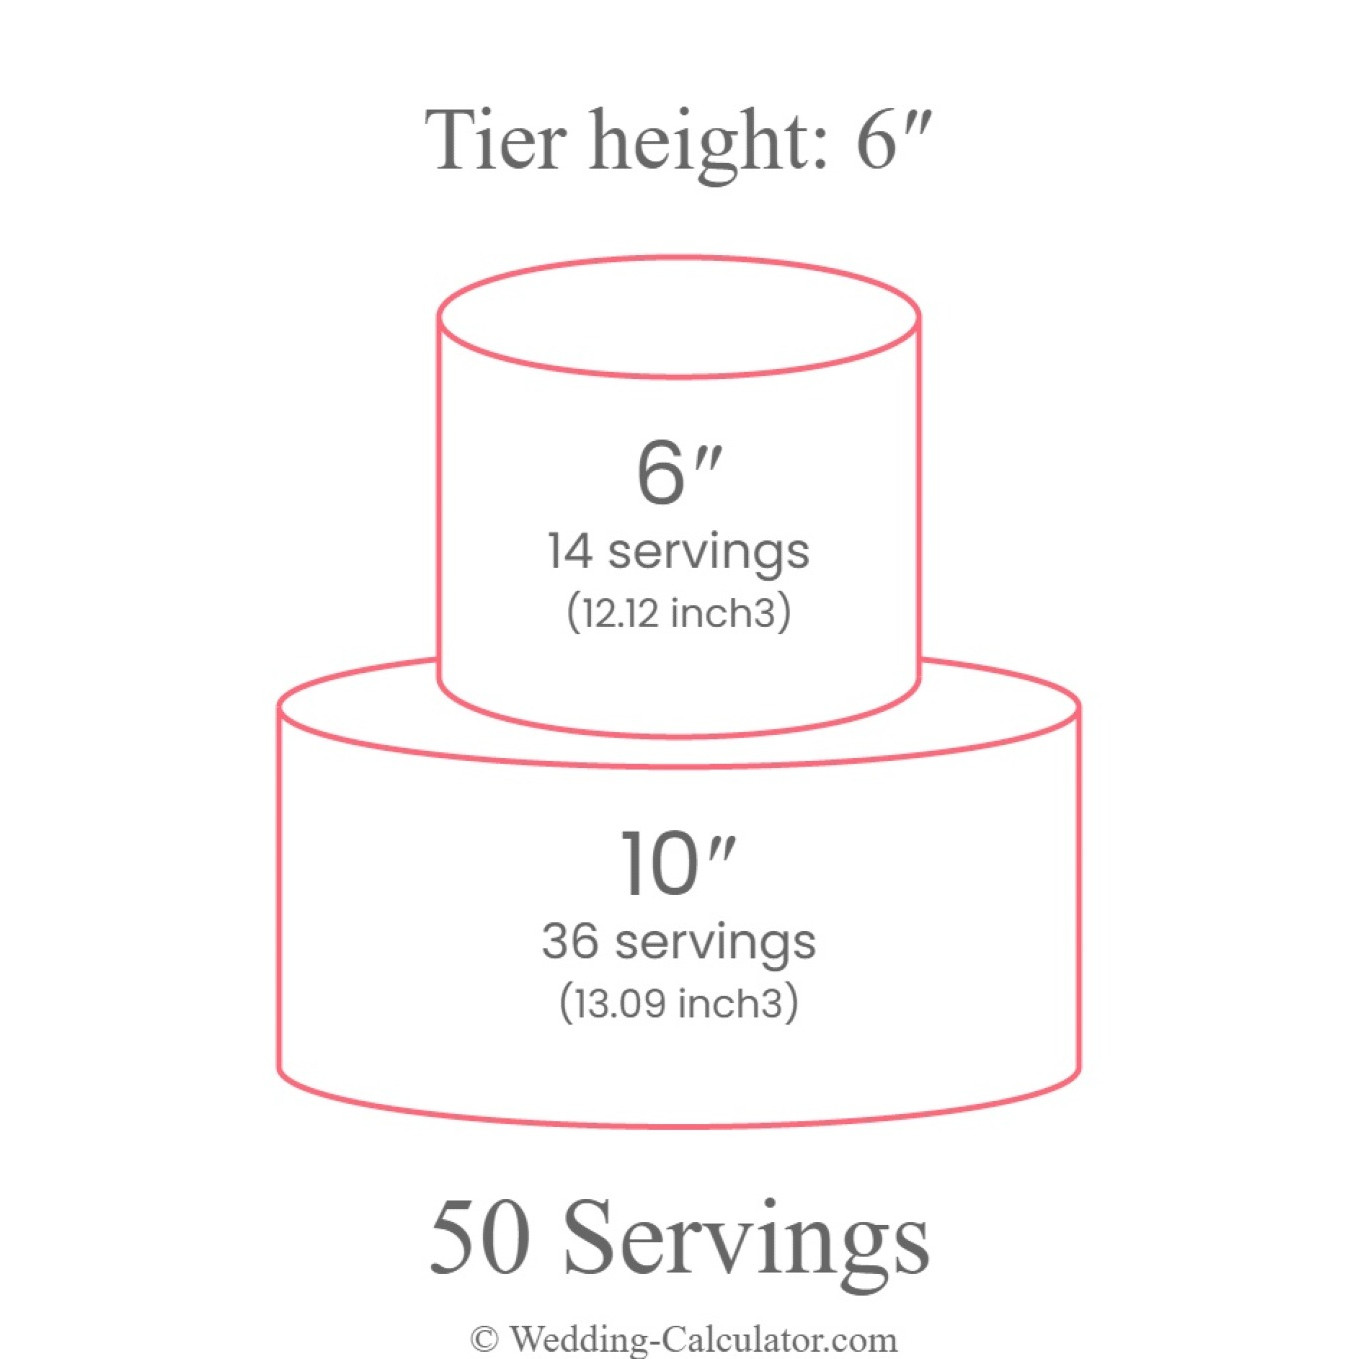 An alternative wedding cake size for 50 guests